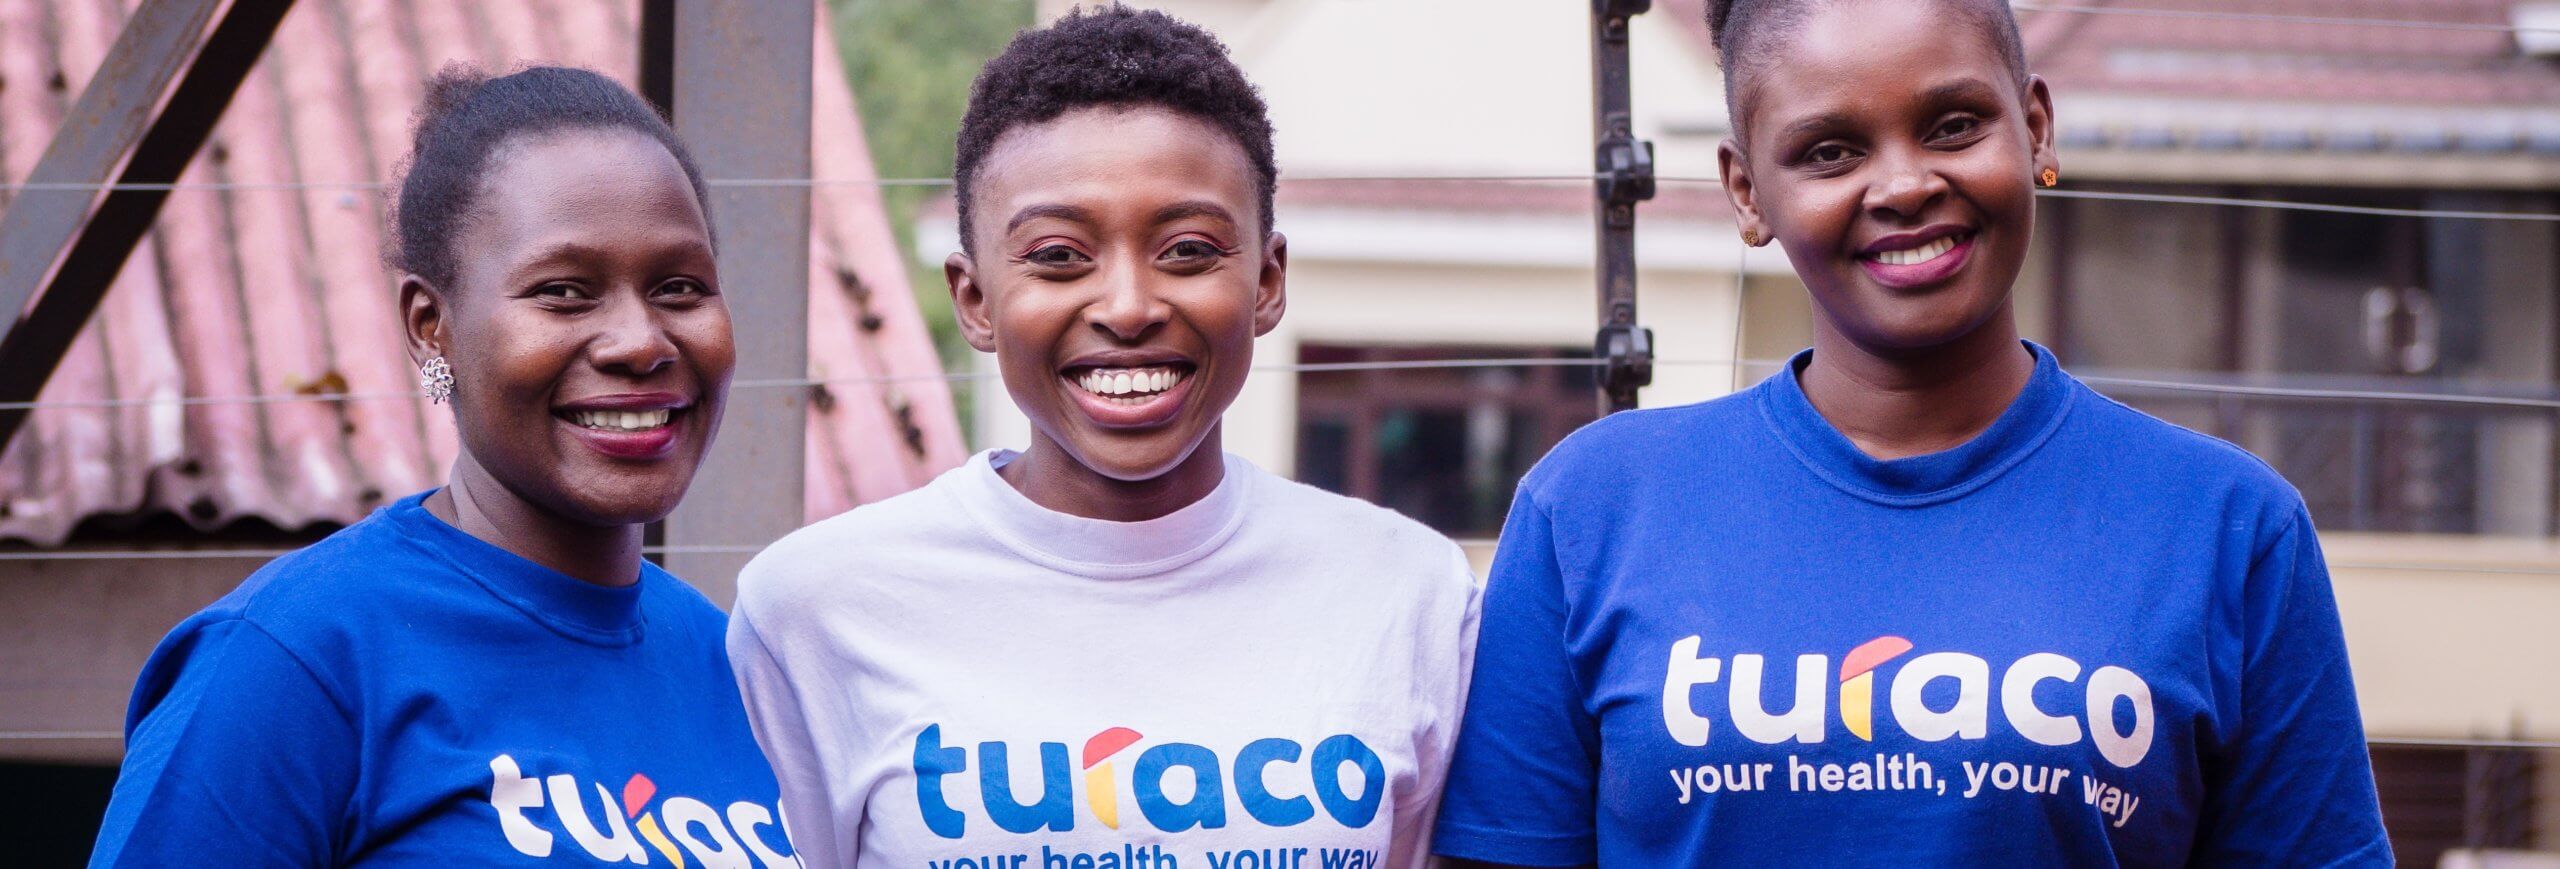 open-capital-advises-turaco-kenya-s-leading-insurtech-startup-on-a-2m-equity-deal-led-by